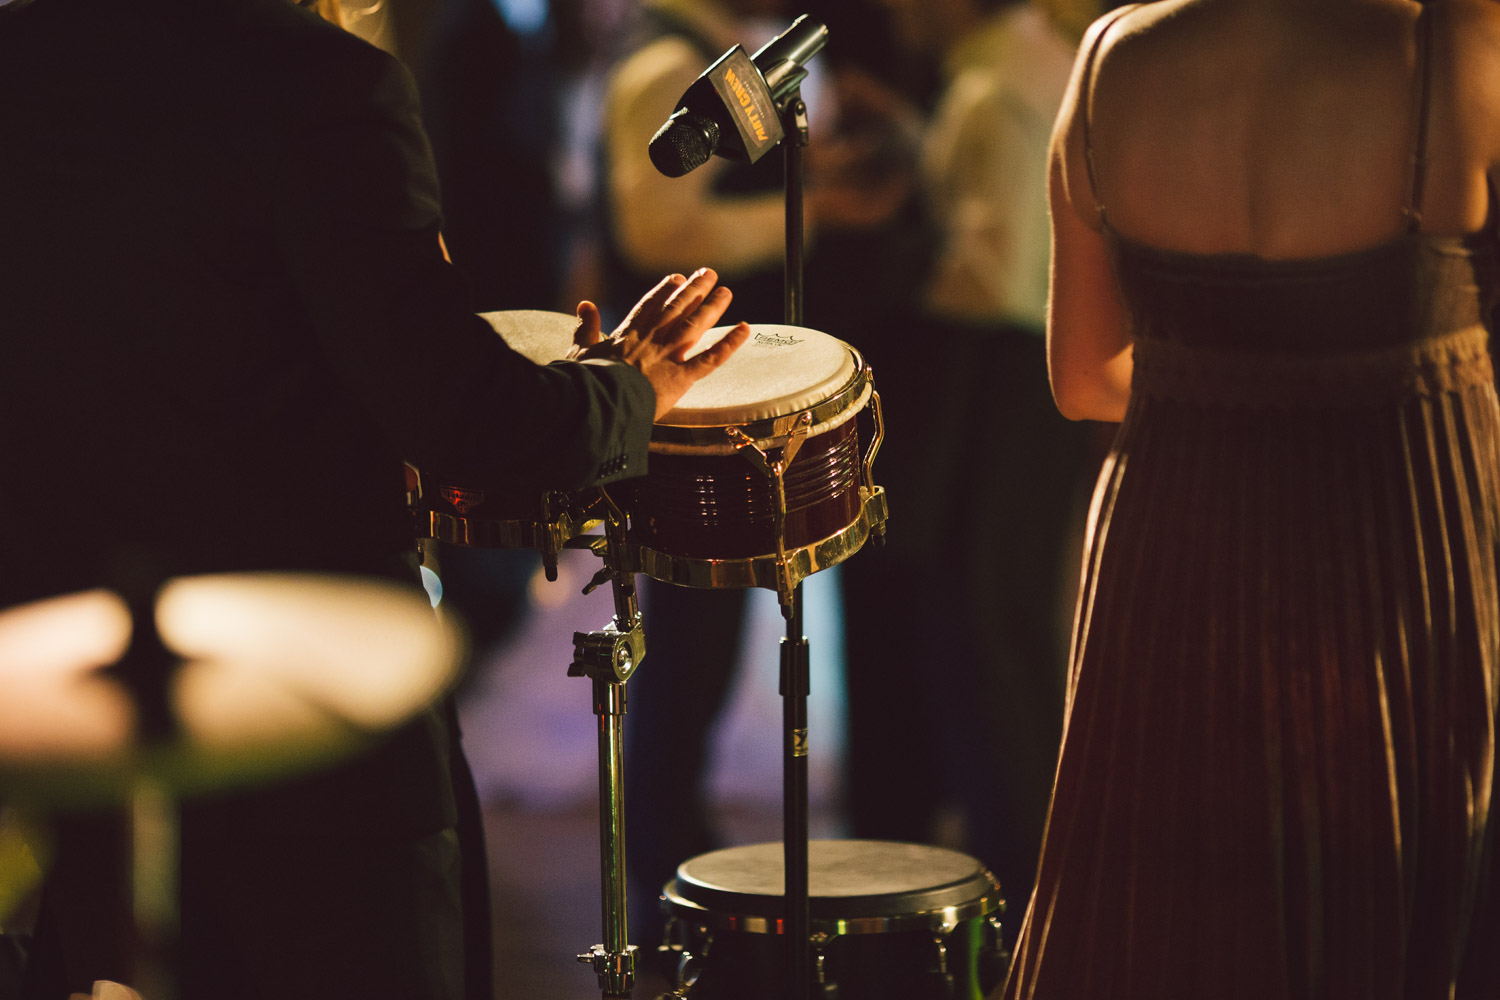 drums at the wedding